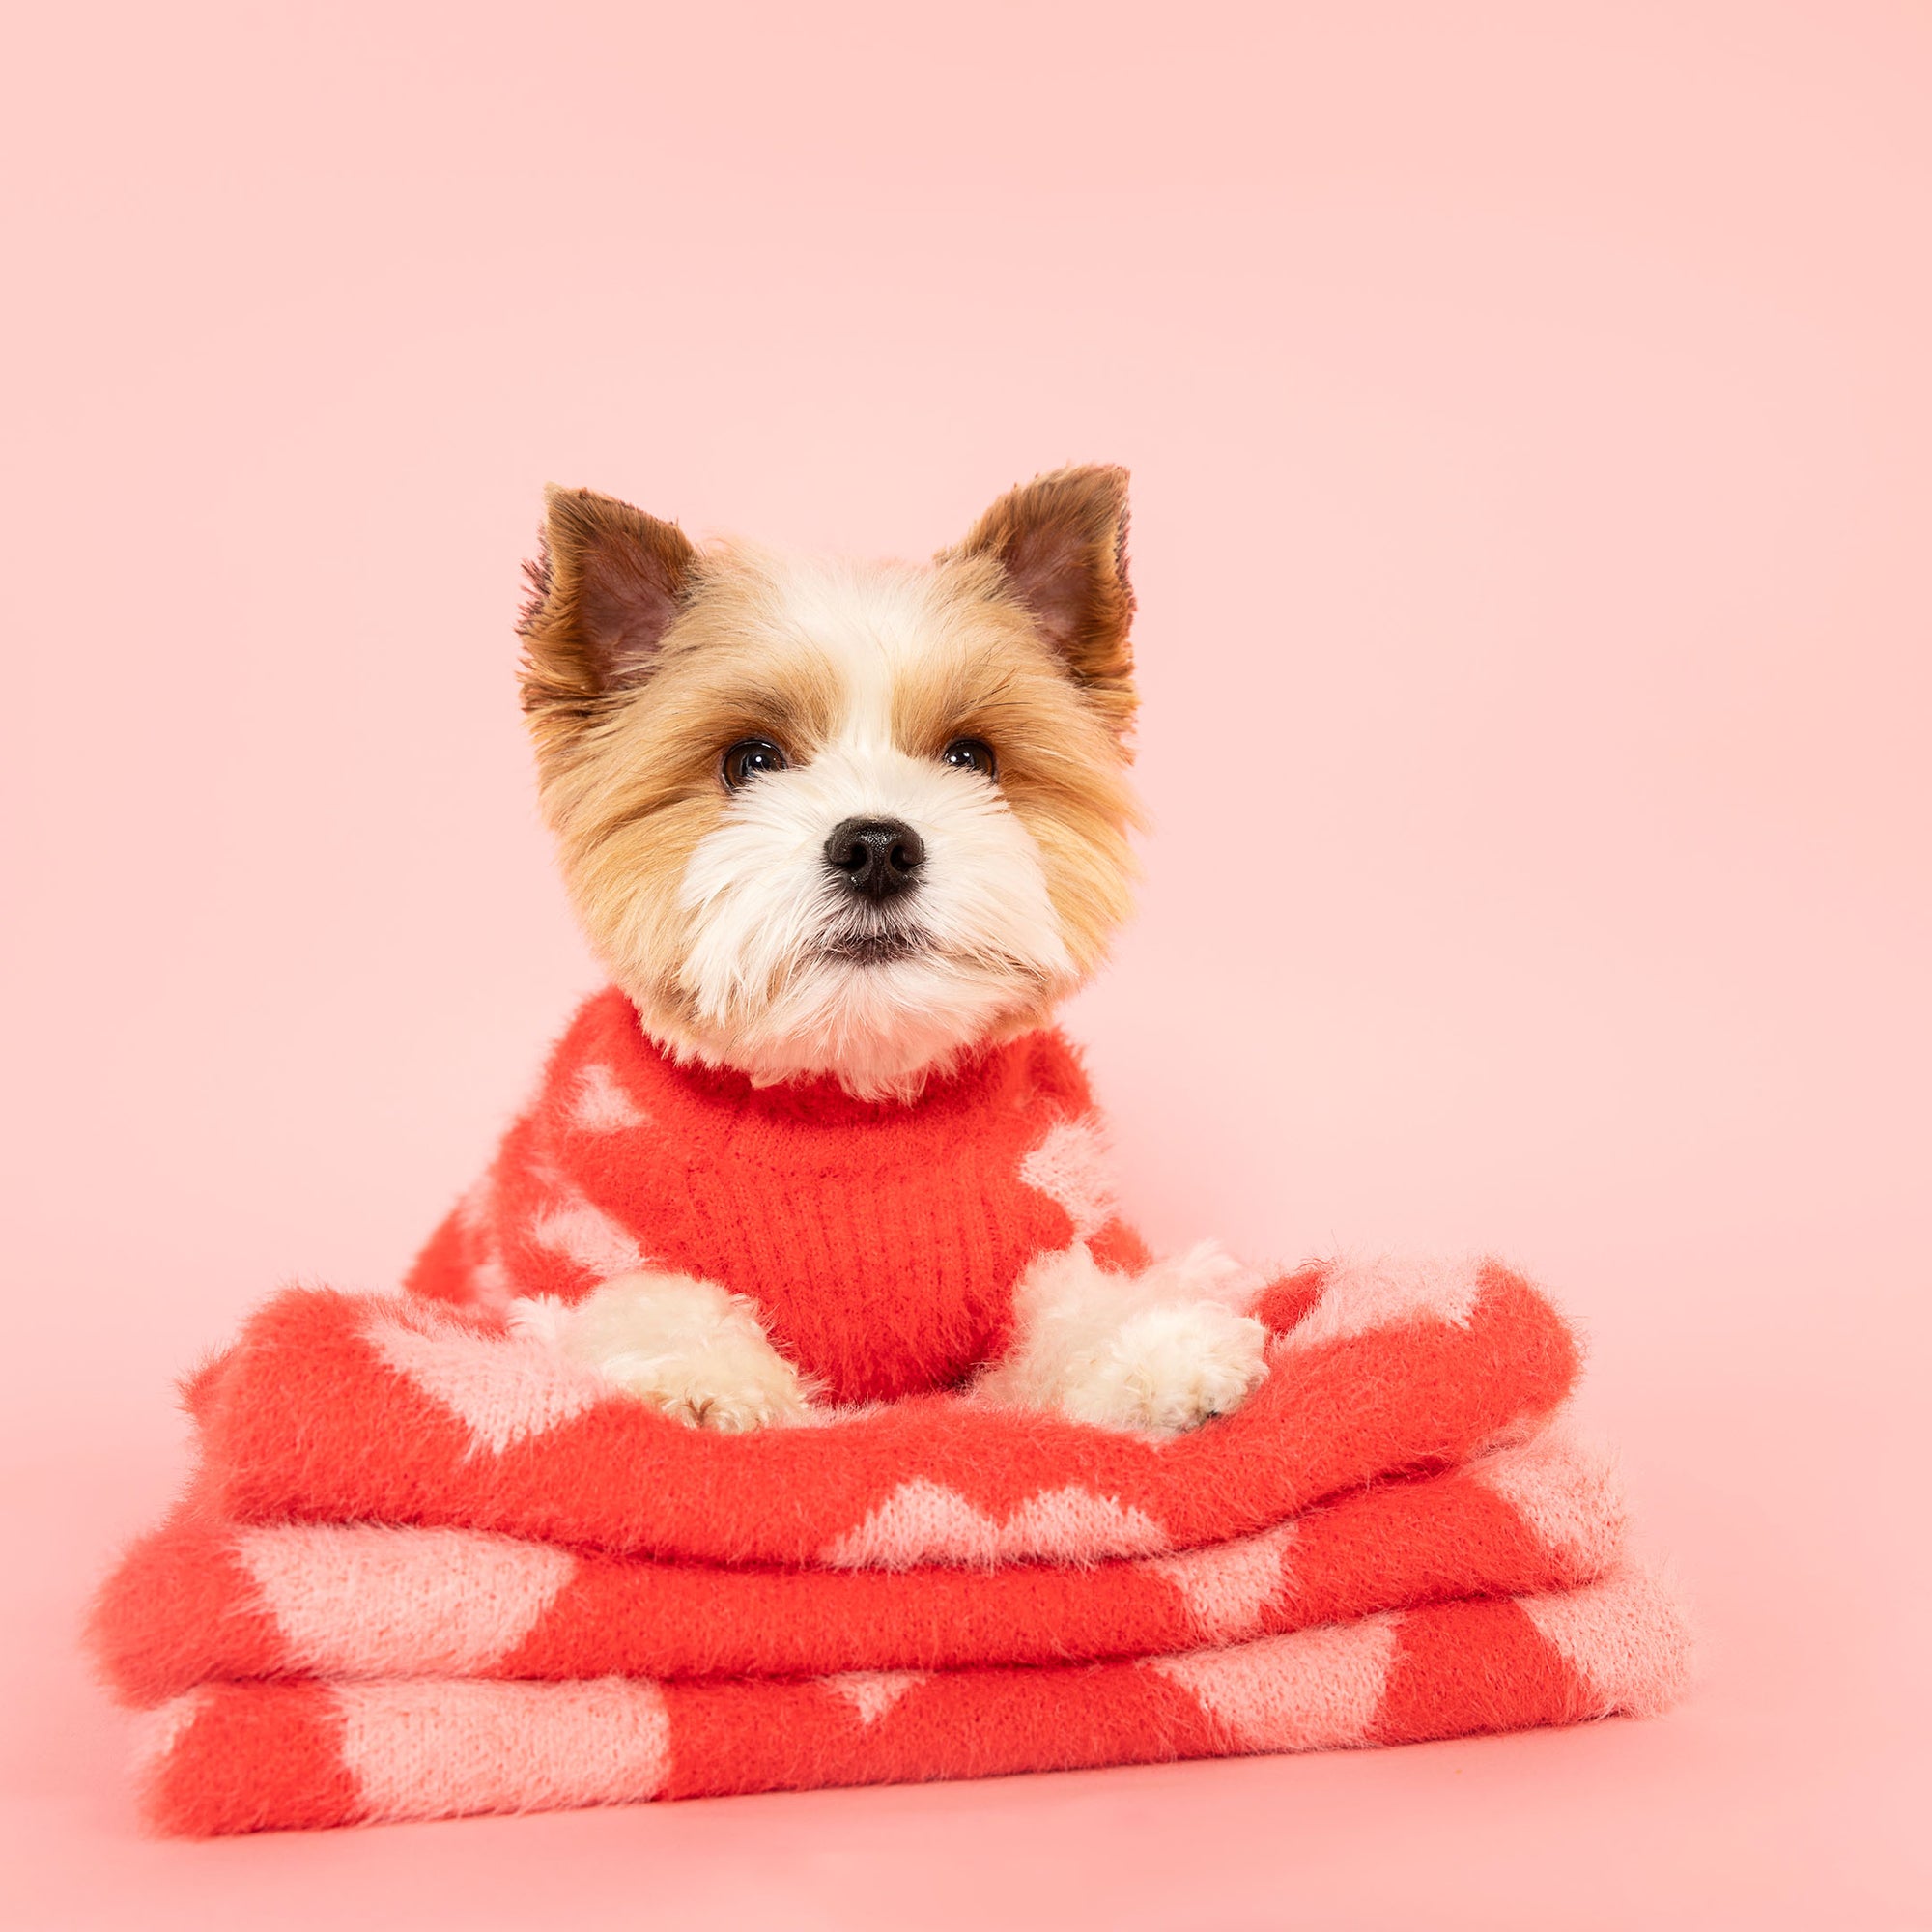 Adorable Yorkshire Terrier mix peeking out from a pile of cozy red and pink heart-patterned sweaters, set against a matching pink background.